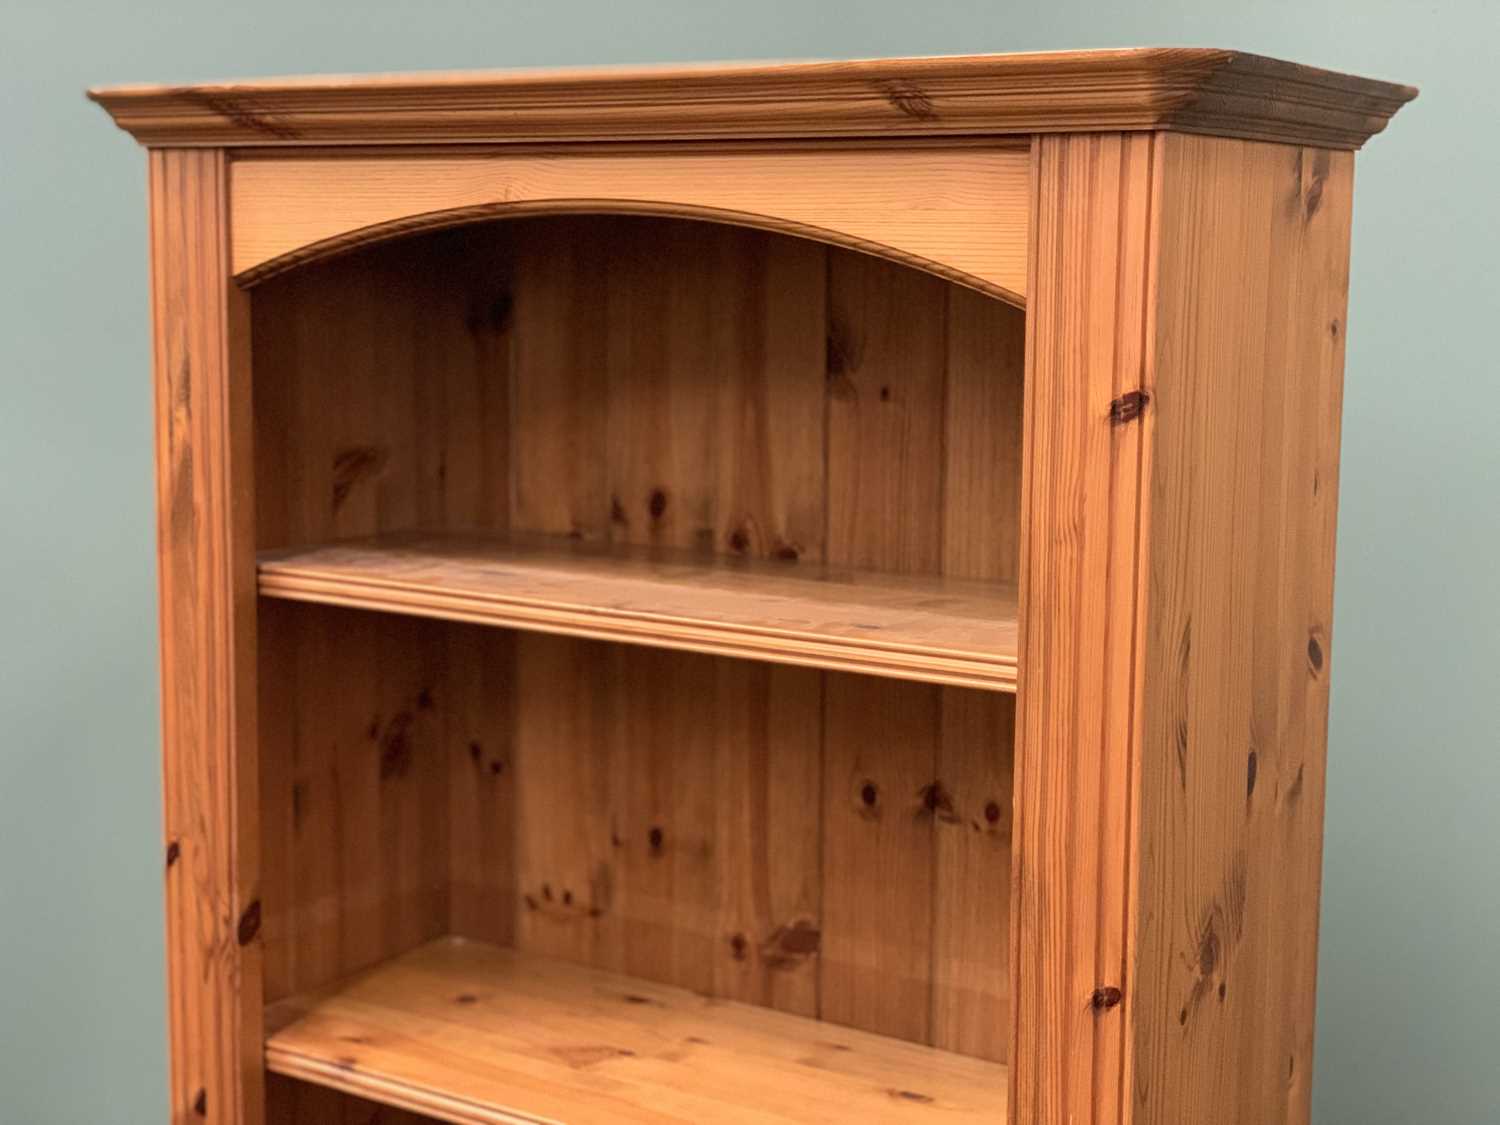 PINE OPEN SHELF BOOKCASE - with six shelves, 189cms H, 78cms W, 32cms D - Image 2 of 4